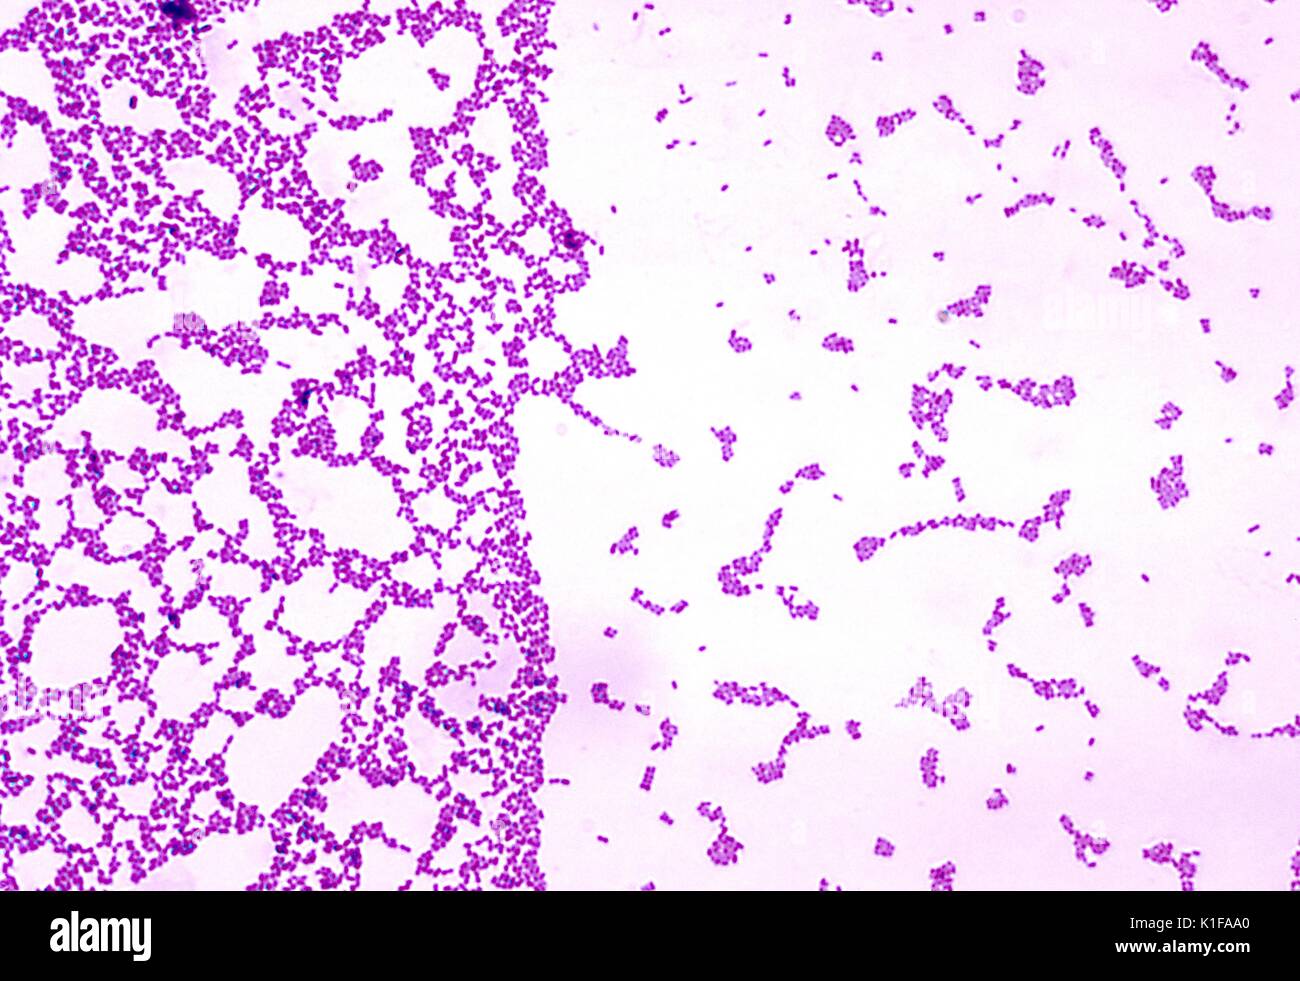 A photomicrograph of Streptococcus mutans bacteria using Gram stain technique, Blood agar plate culture yields coccal-like morphology without chains The S mutans organism can cause subacute bacterial endocarditis and dental caries Streptococci Image courtesy CDC/Dr Richard Facklam, 1975. Stock Photo